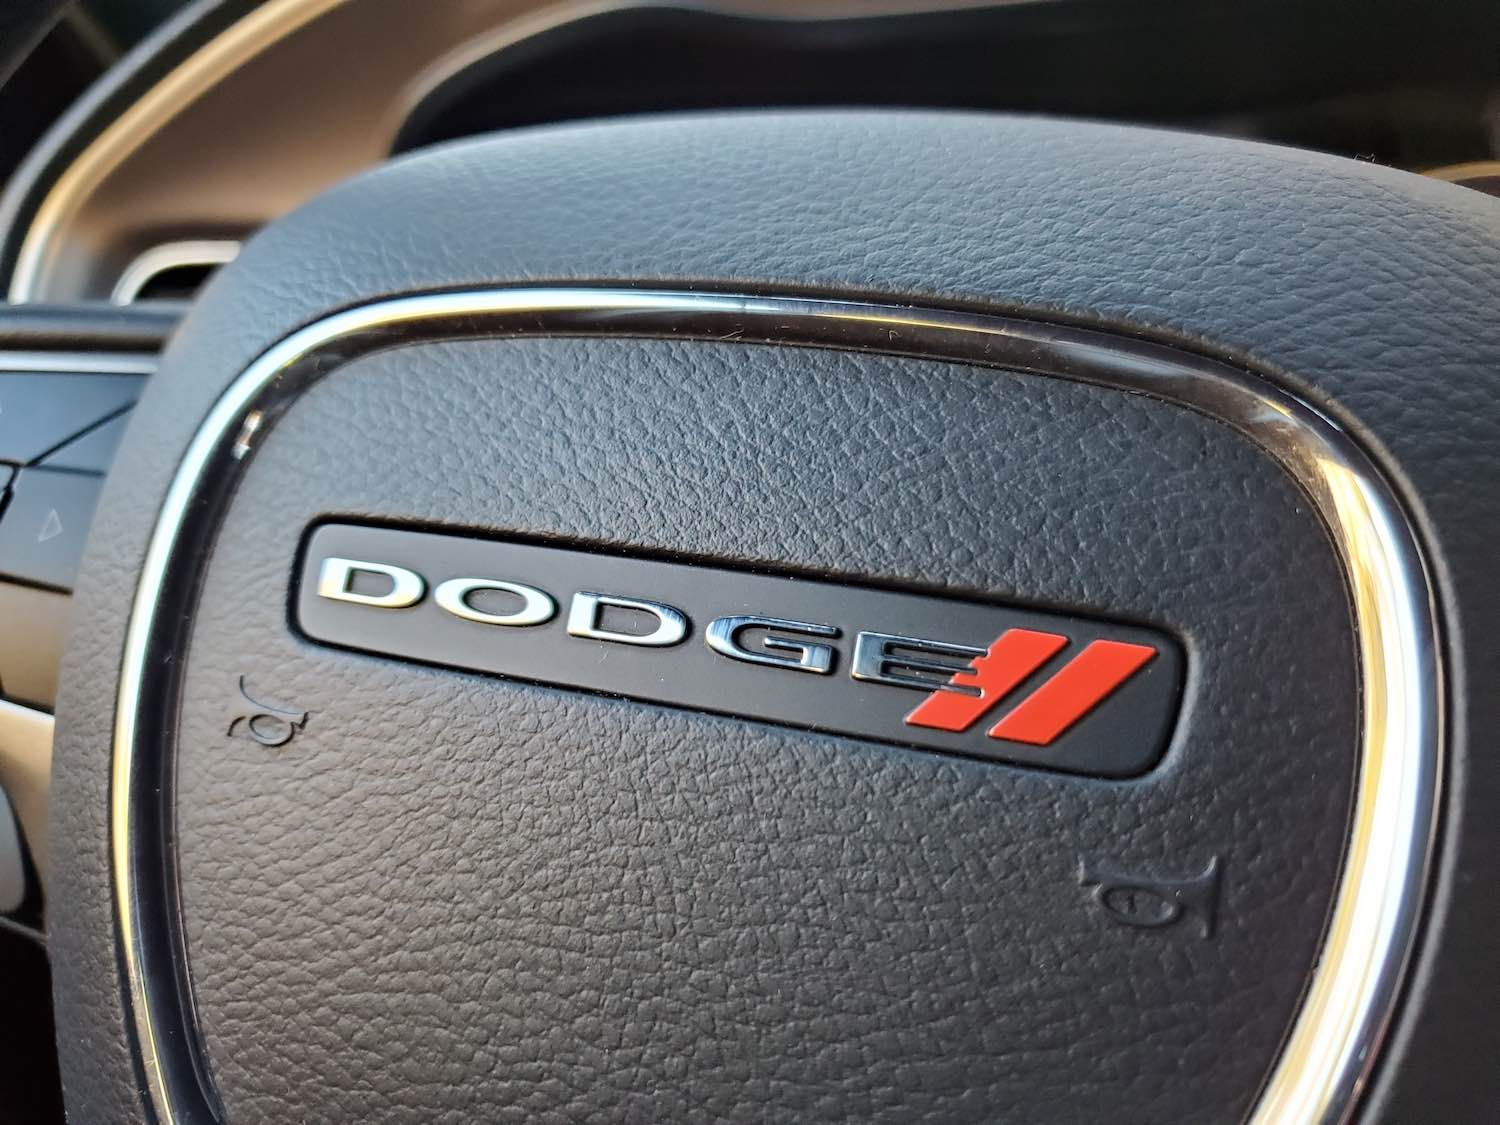 Closeup of the Dodge logo on the steering wheel of a Charger or Challenger car.